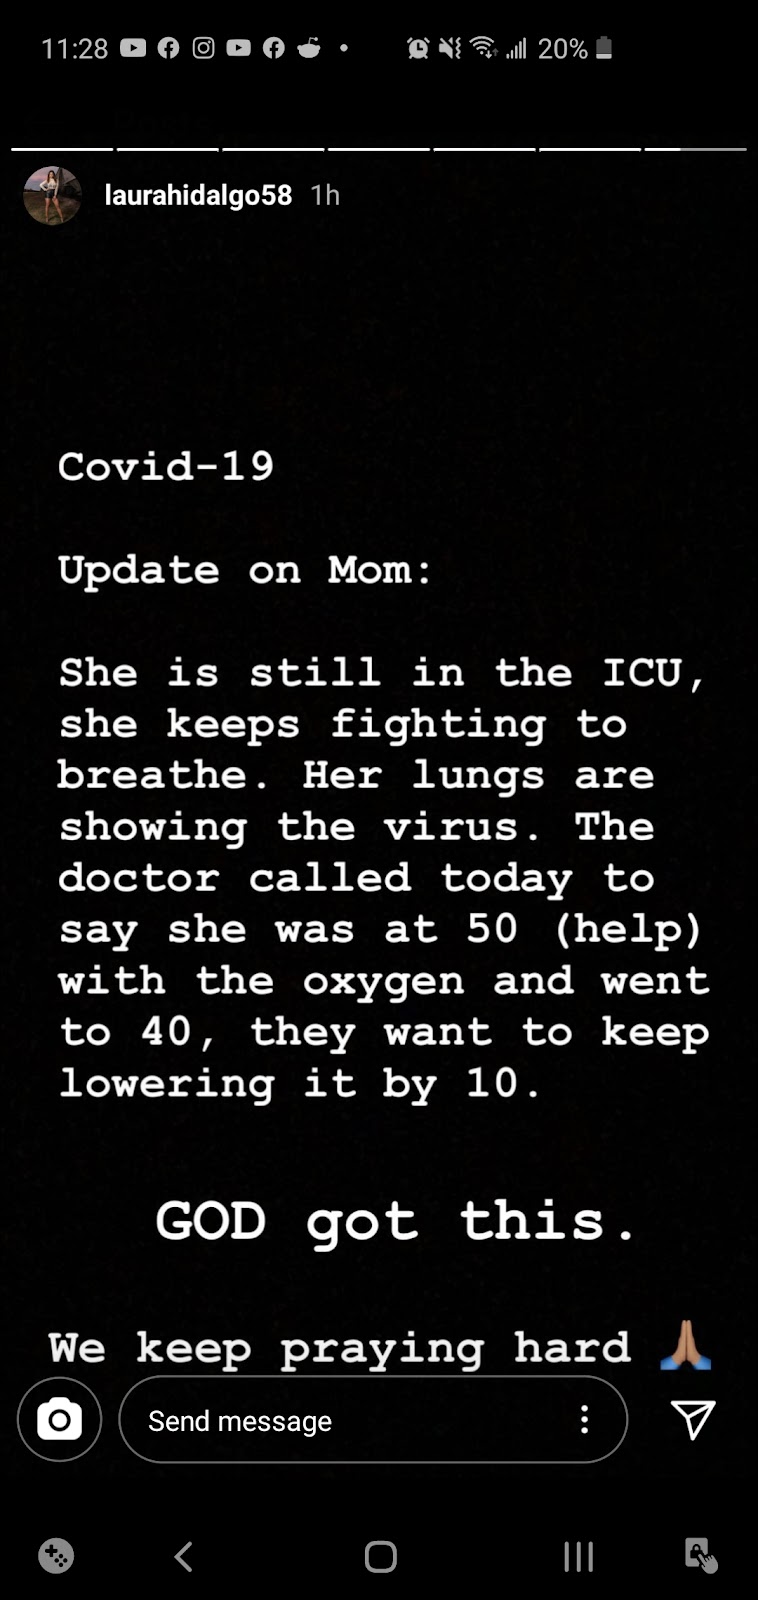 One of the many updates of our Houston Millennial friend about her mom's coronavirus case